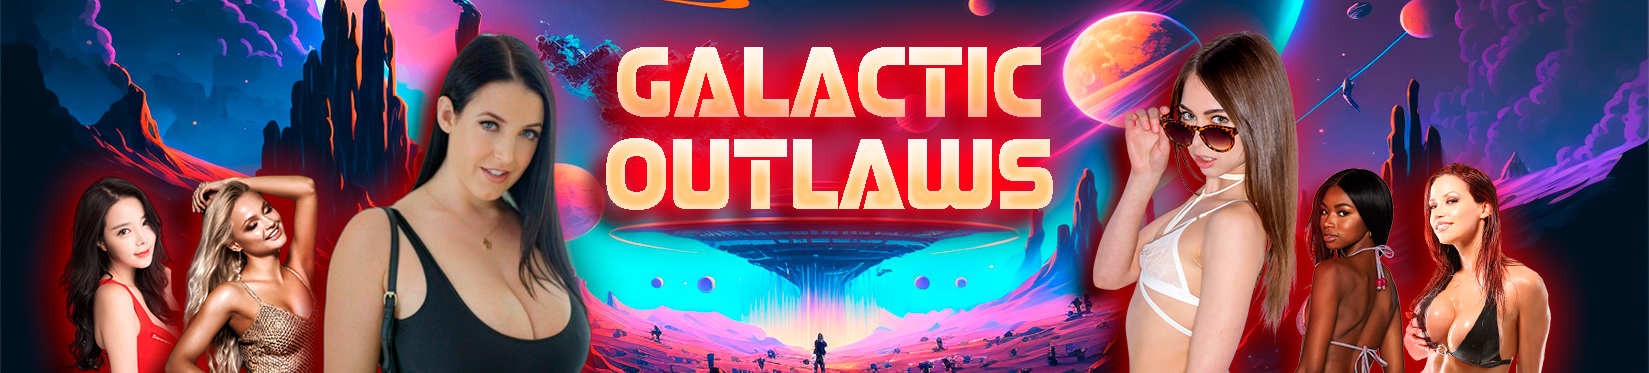 Galactic Outlaws poster